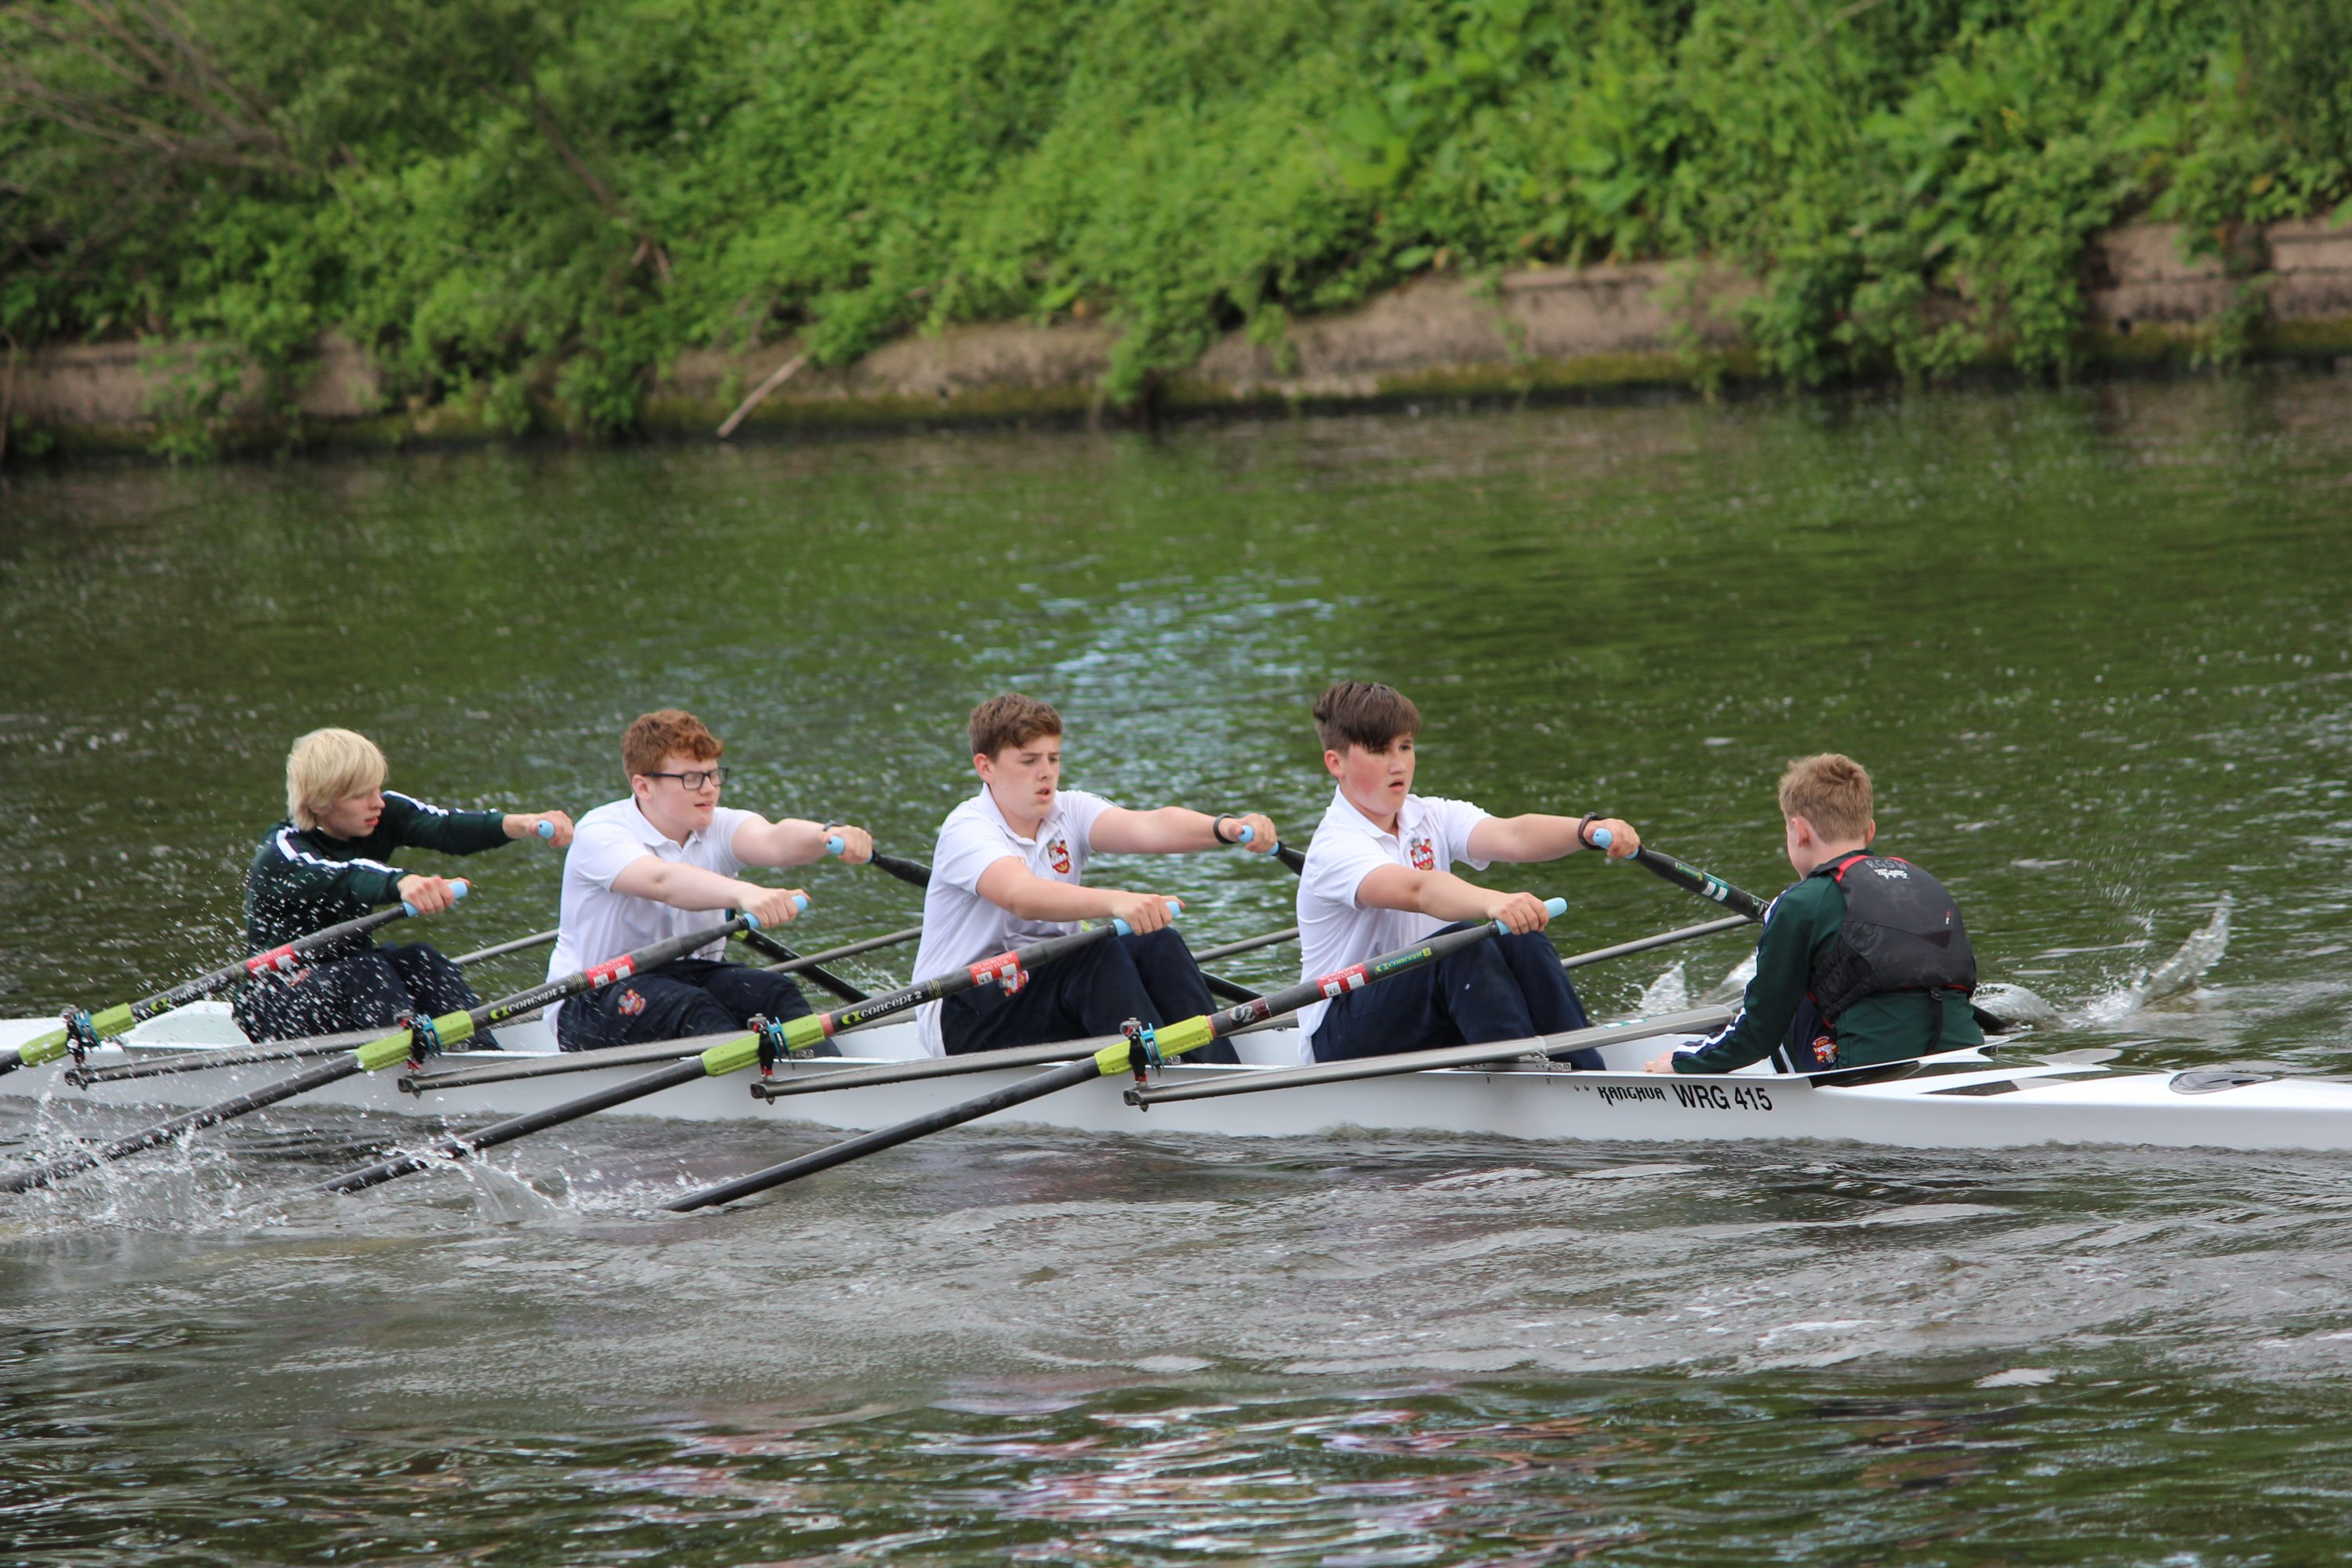 RGS at the Worcester Spring Regatta